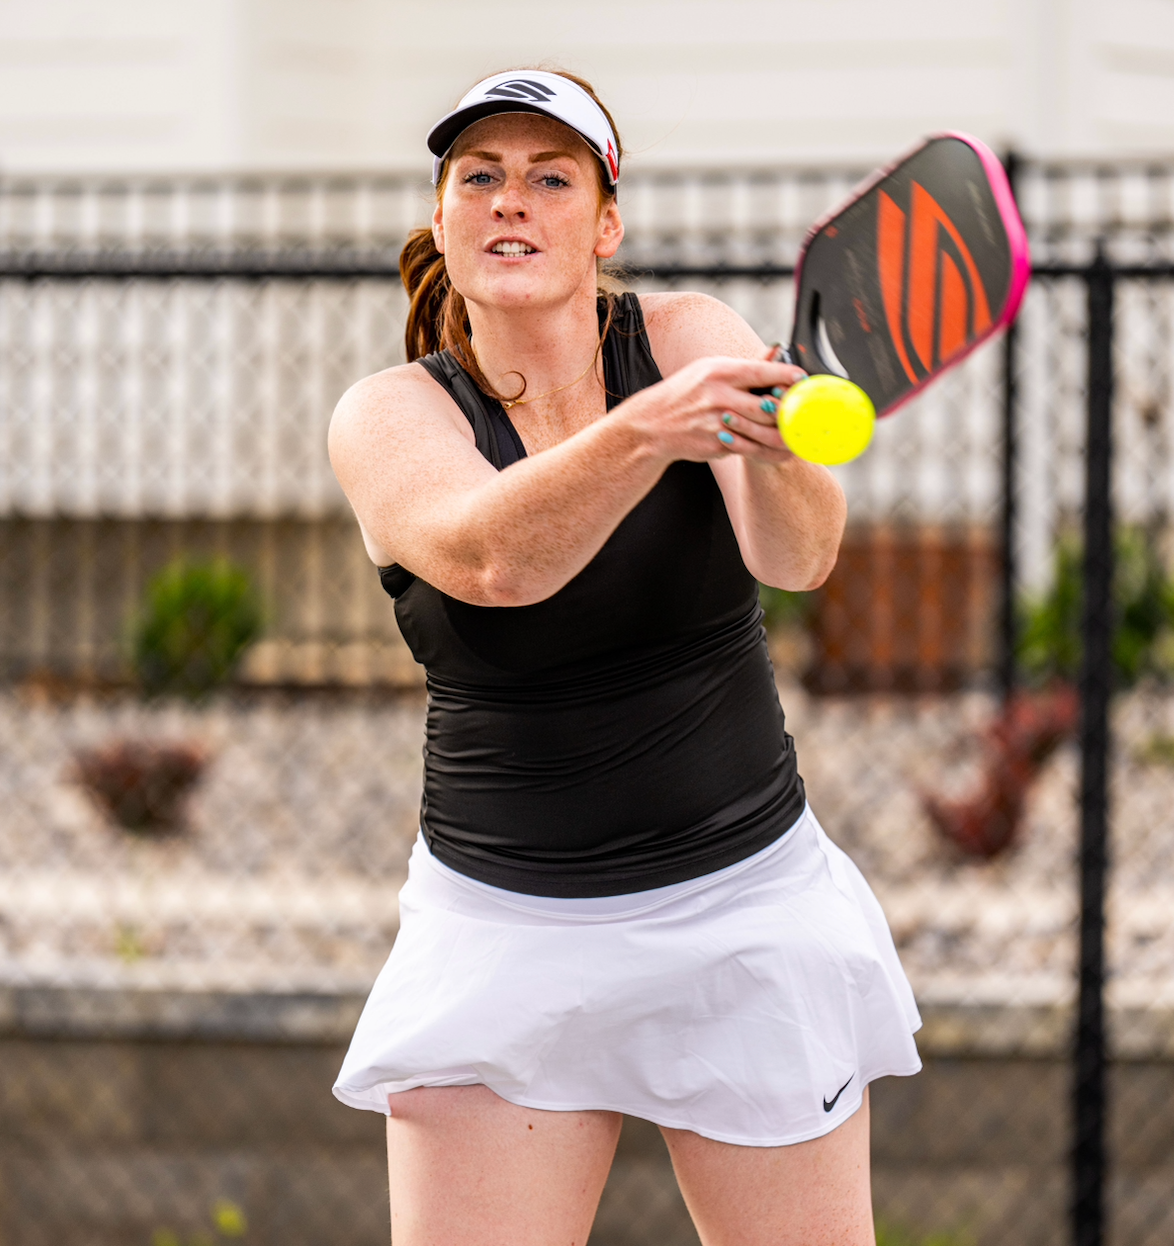 Selkirk Emerging Pro Brooke Bromley hits a two-handed backhand volley with her Project 002 paddle. She wears a white Selkirk visor, a black tank top and a white Nike skirt.